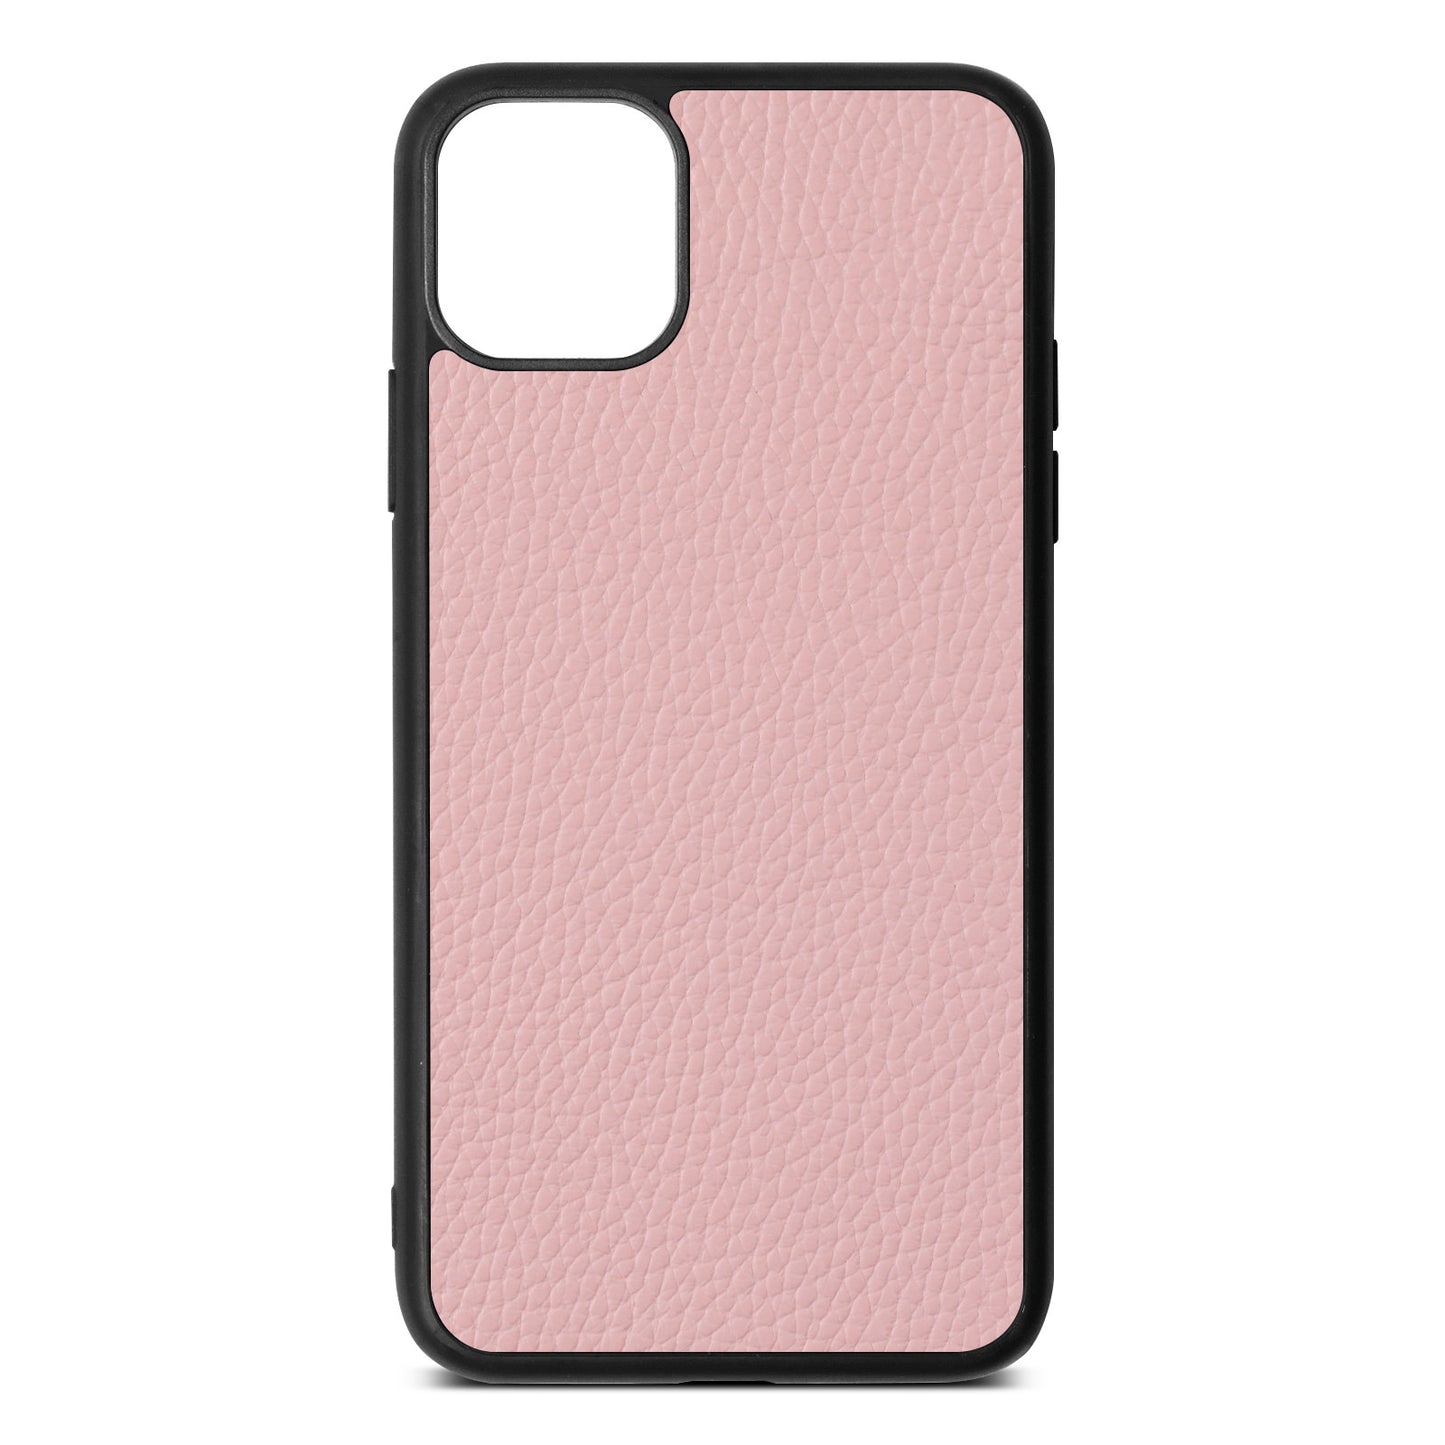 Blank iPhone 11 Pro Max Pink Pebble Leather Case